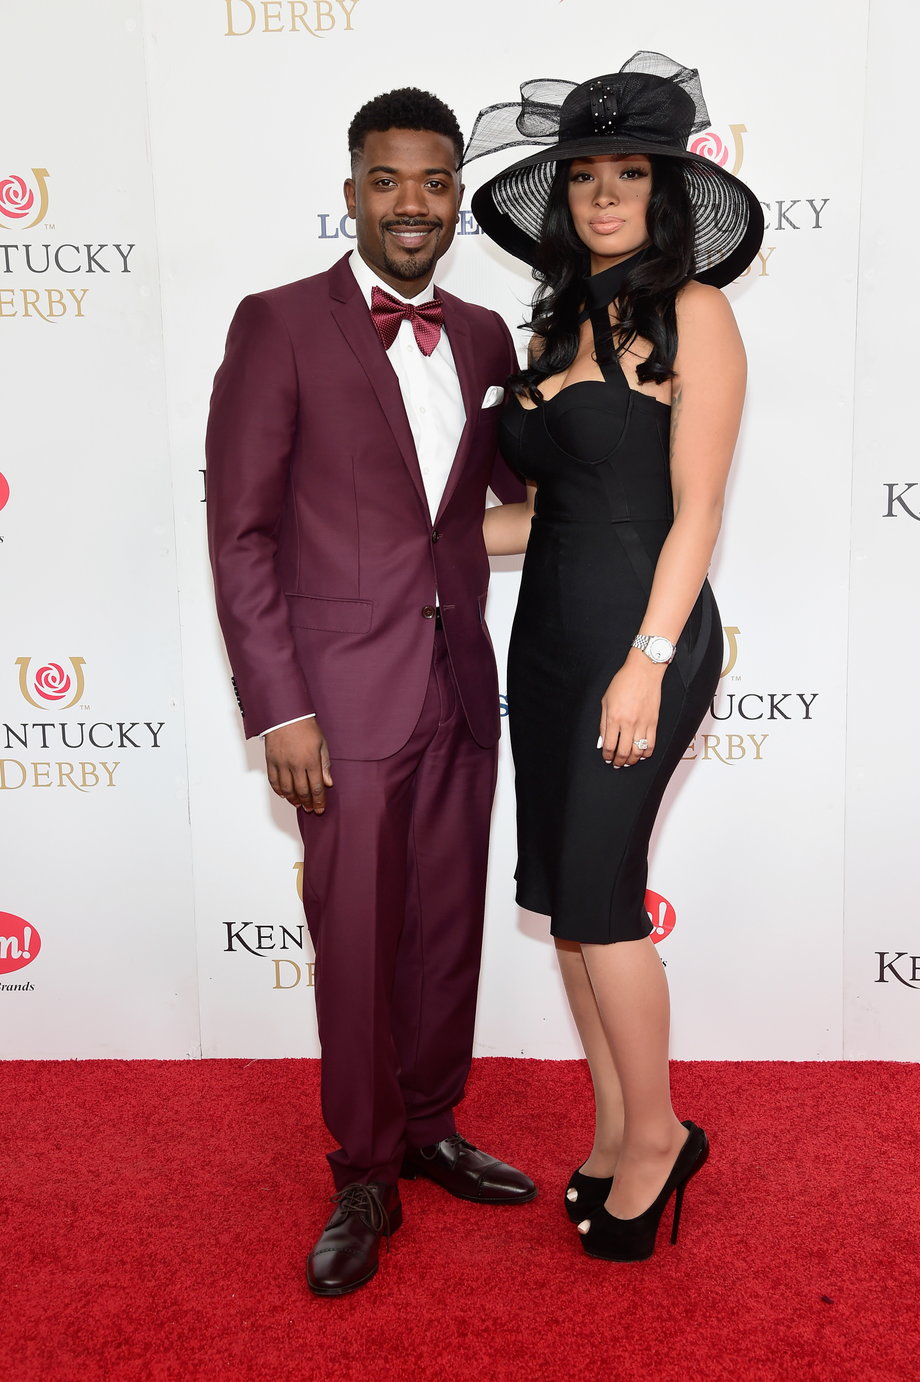 BEST: Singer Ray J and fashion designer Princess Love looked elegant and classy.